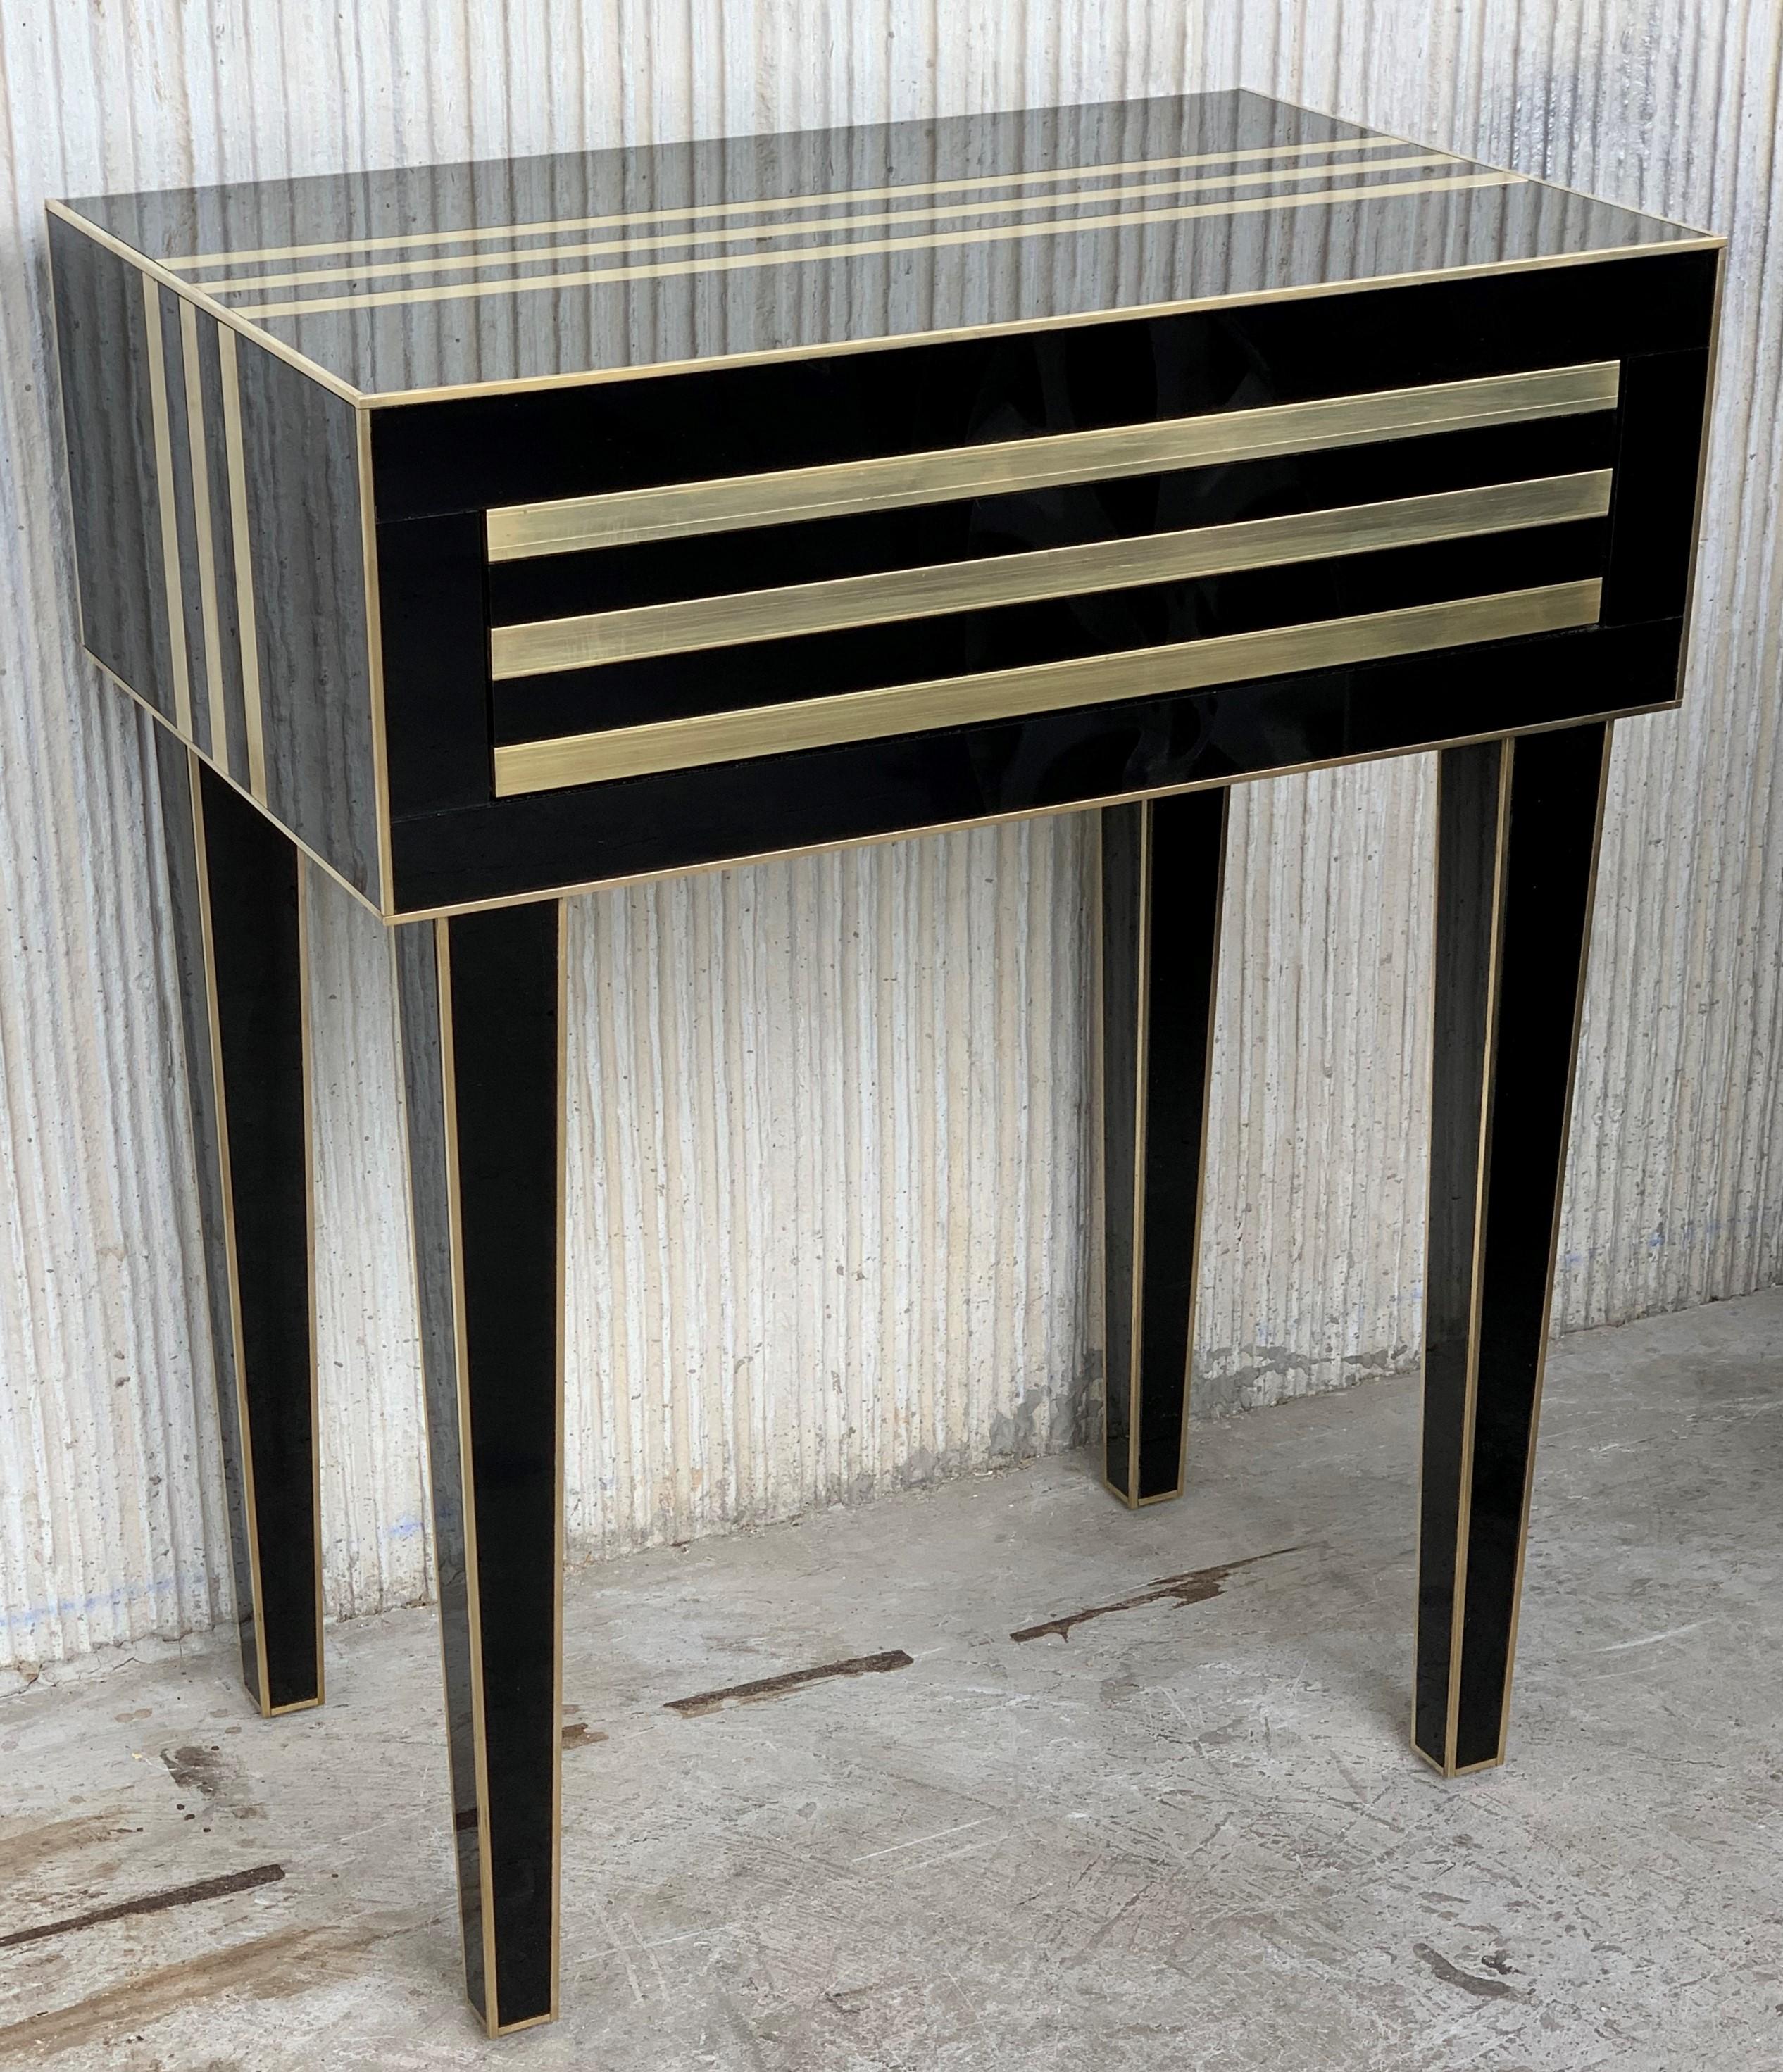 Spanish New Pair of High Black and Brass Nightstands with Drawer, Push System Opening